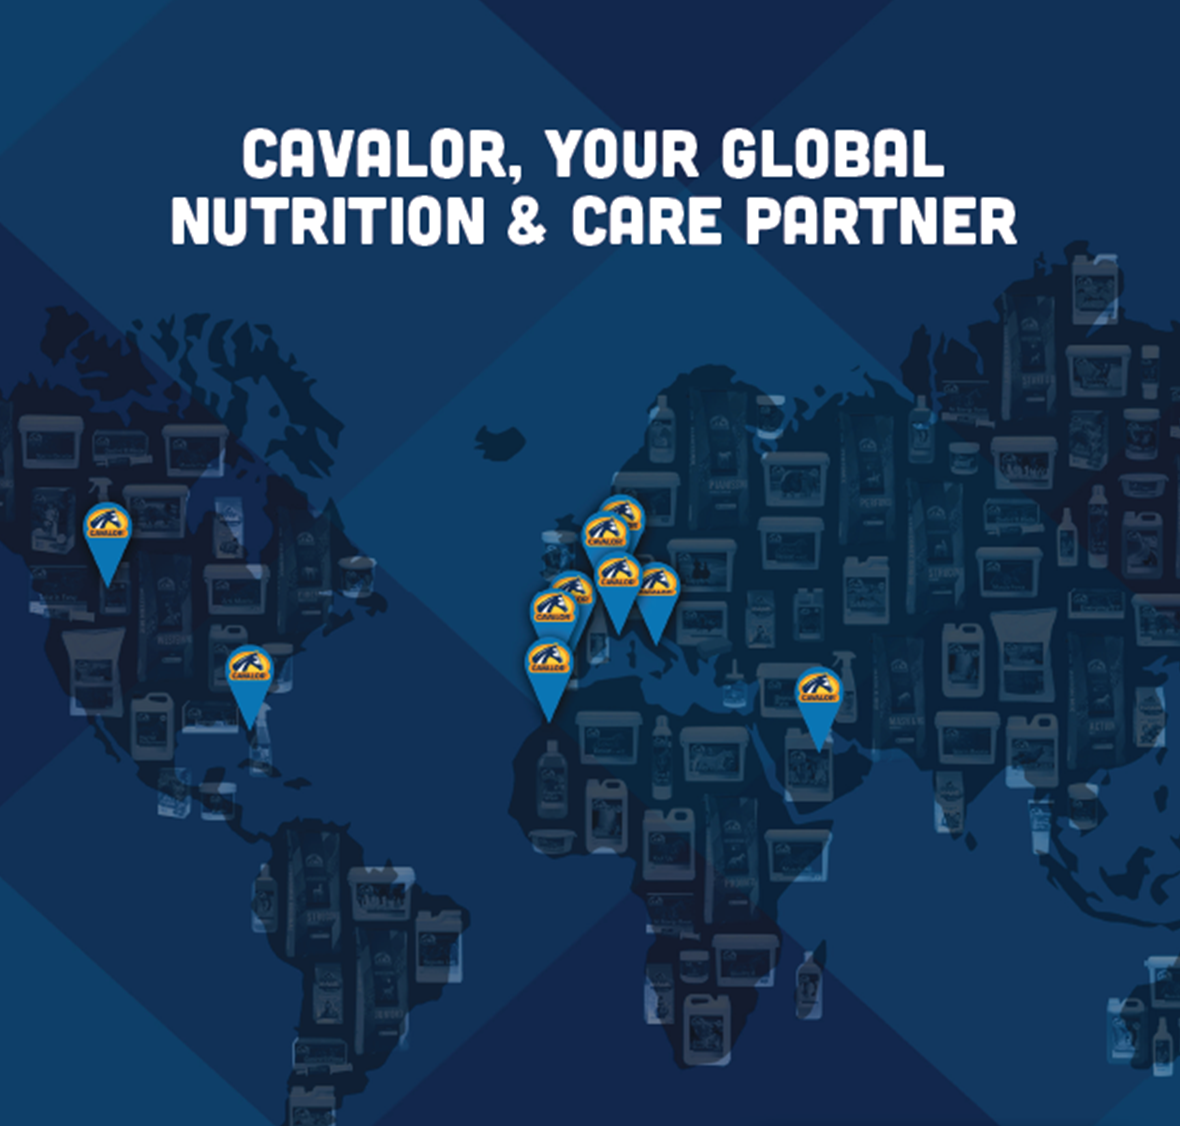 CAVALOR® FEED AVAILABLE AT THE SOUTHERN EUROPEAN AND AMERICAN TOURS